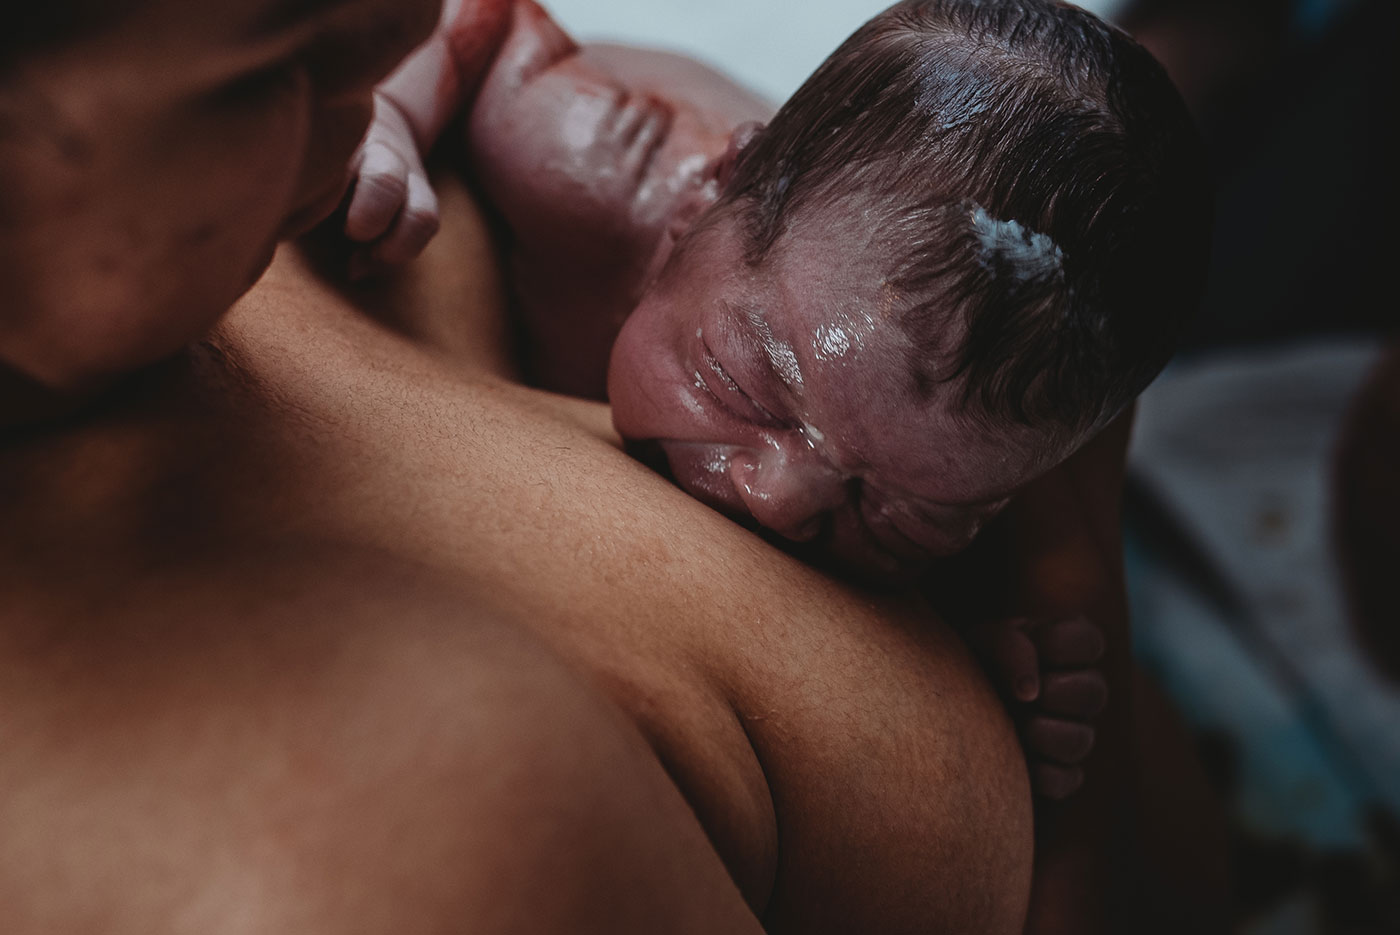 baby cries on her mother's breast after being born at home